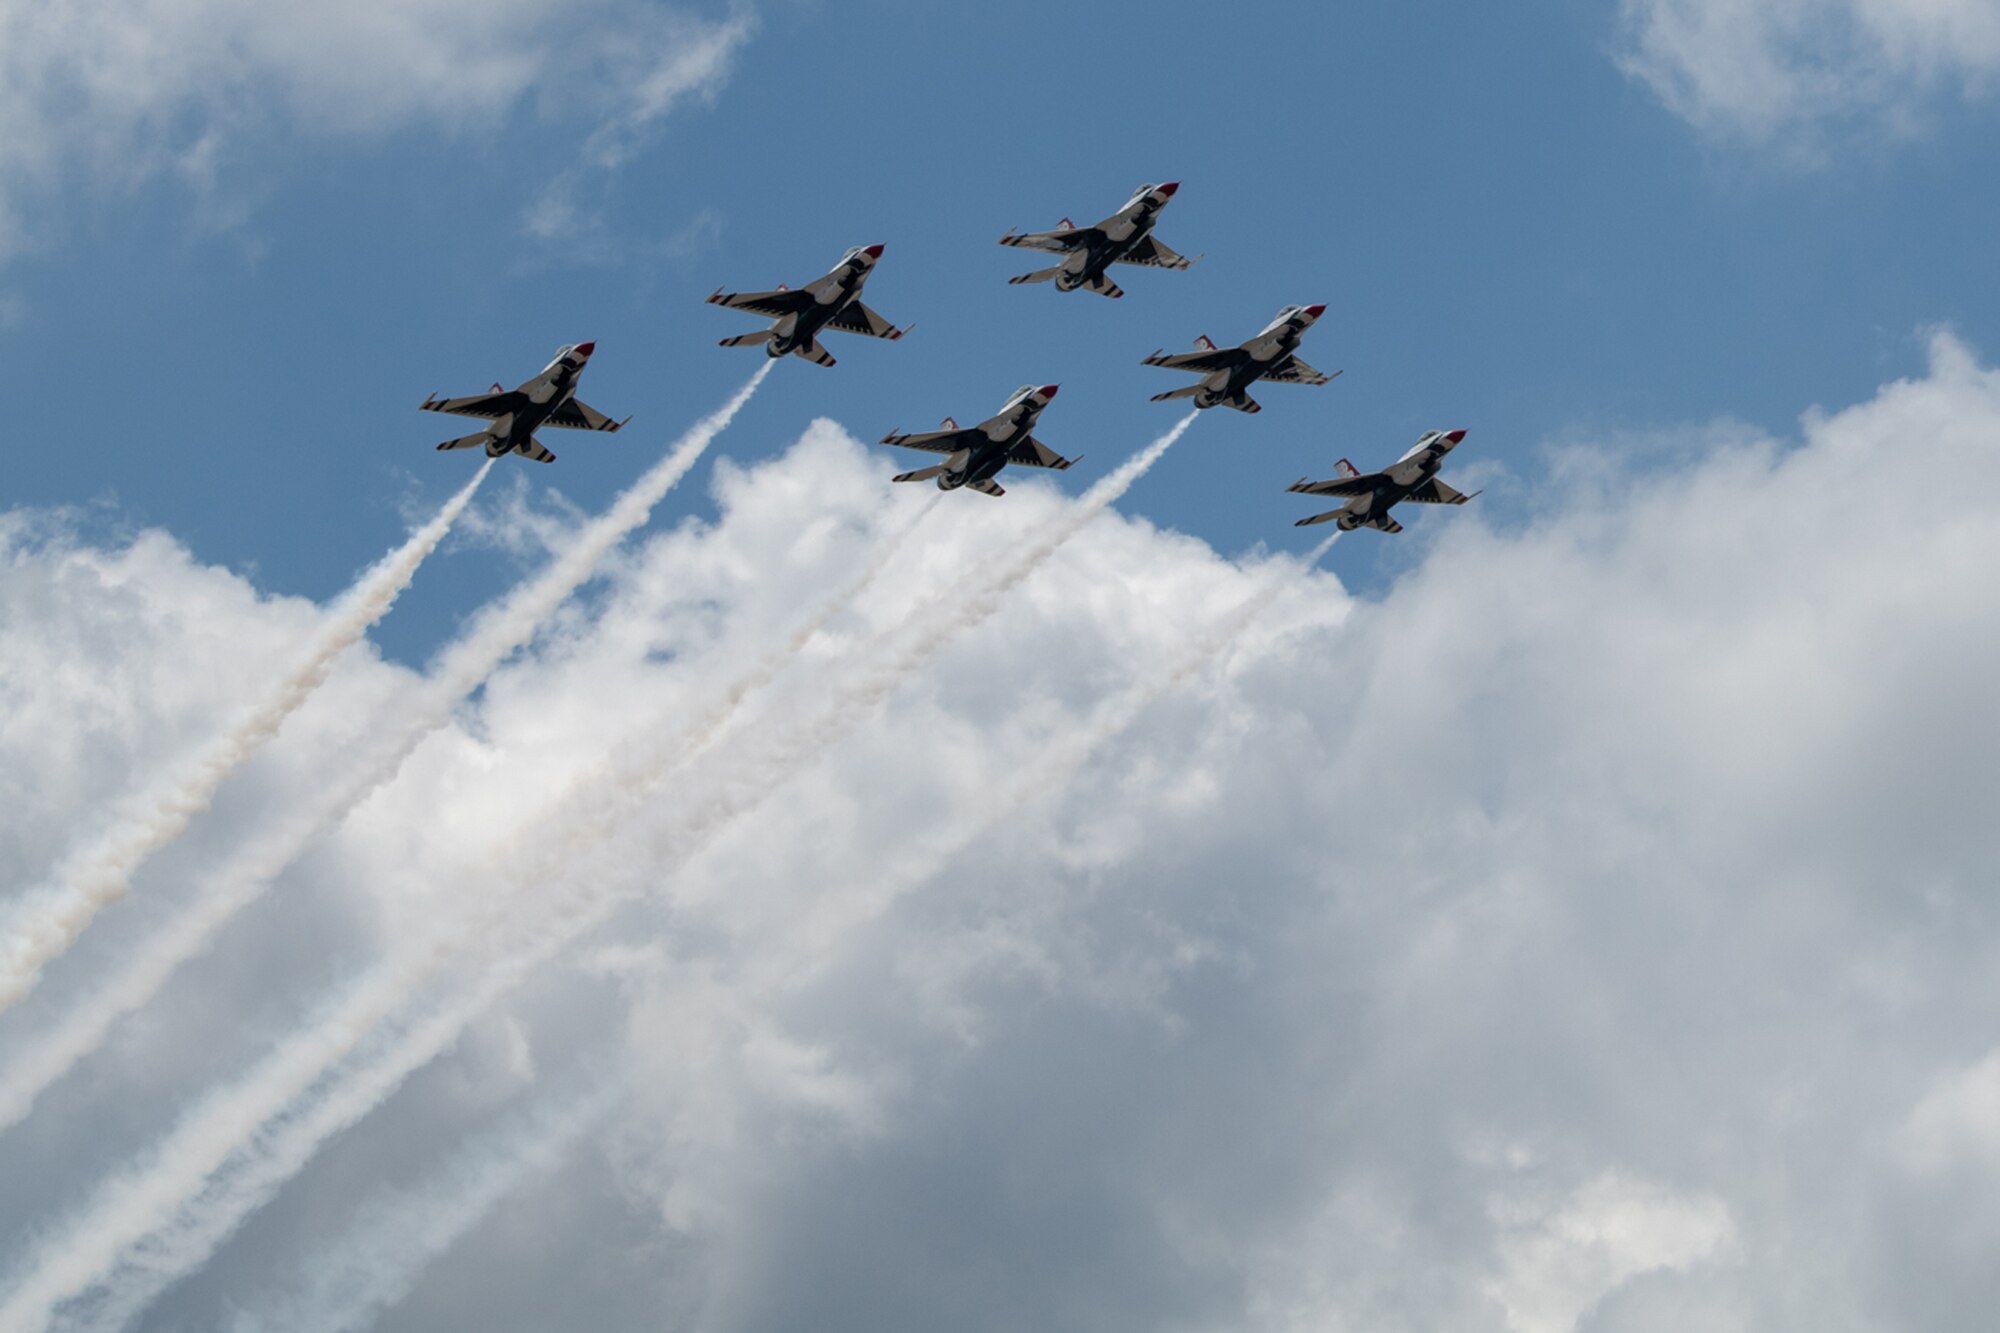 The United States Air Force Air Demonstration Squadron “Thunderbirds” fly over the city of San Antonio May 13 in support of Operation America Strong.